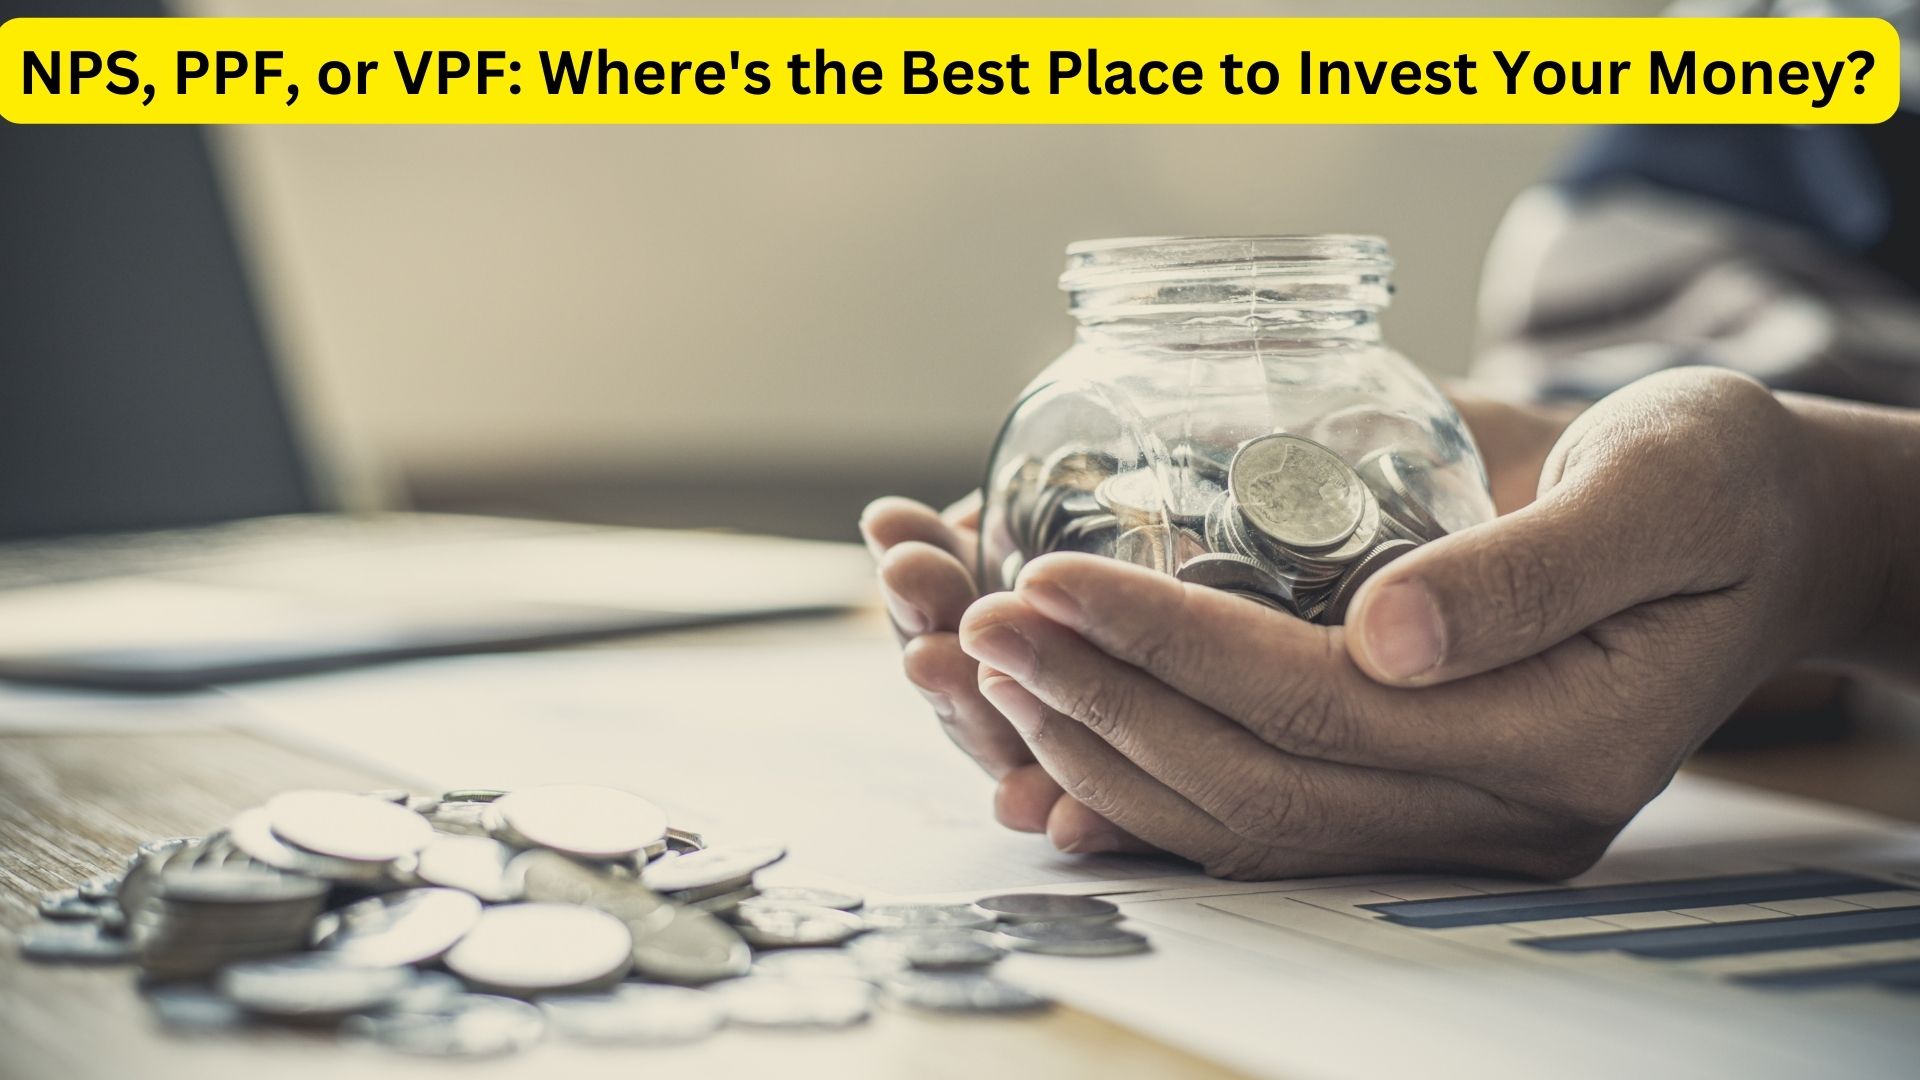 NPS, PPF, or VPF: Where's the Best Place to Invest Your Money?